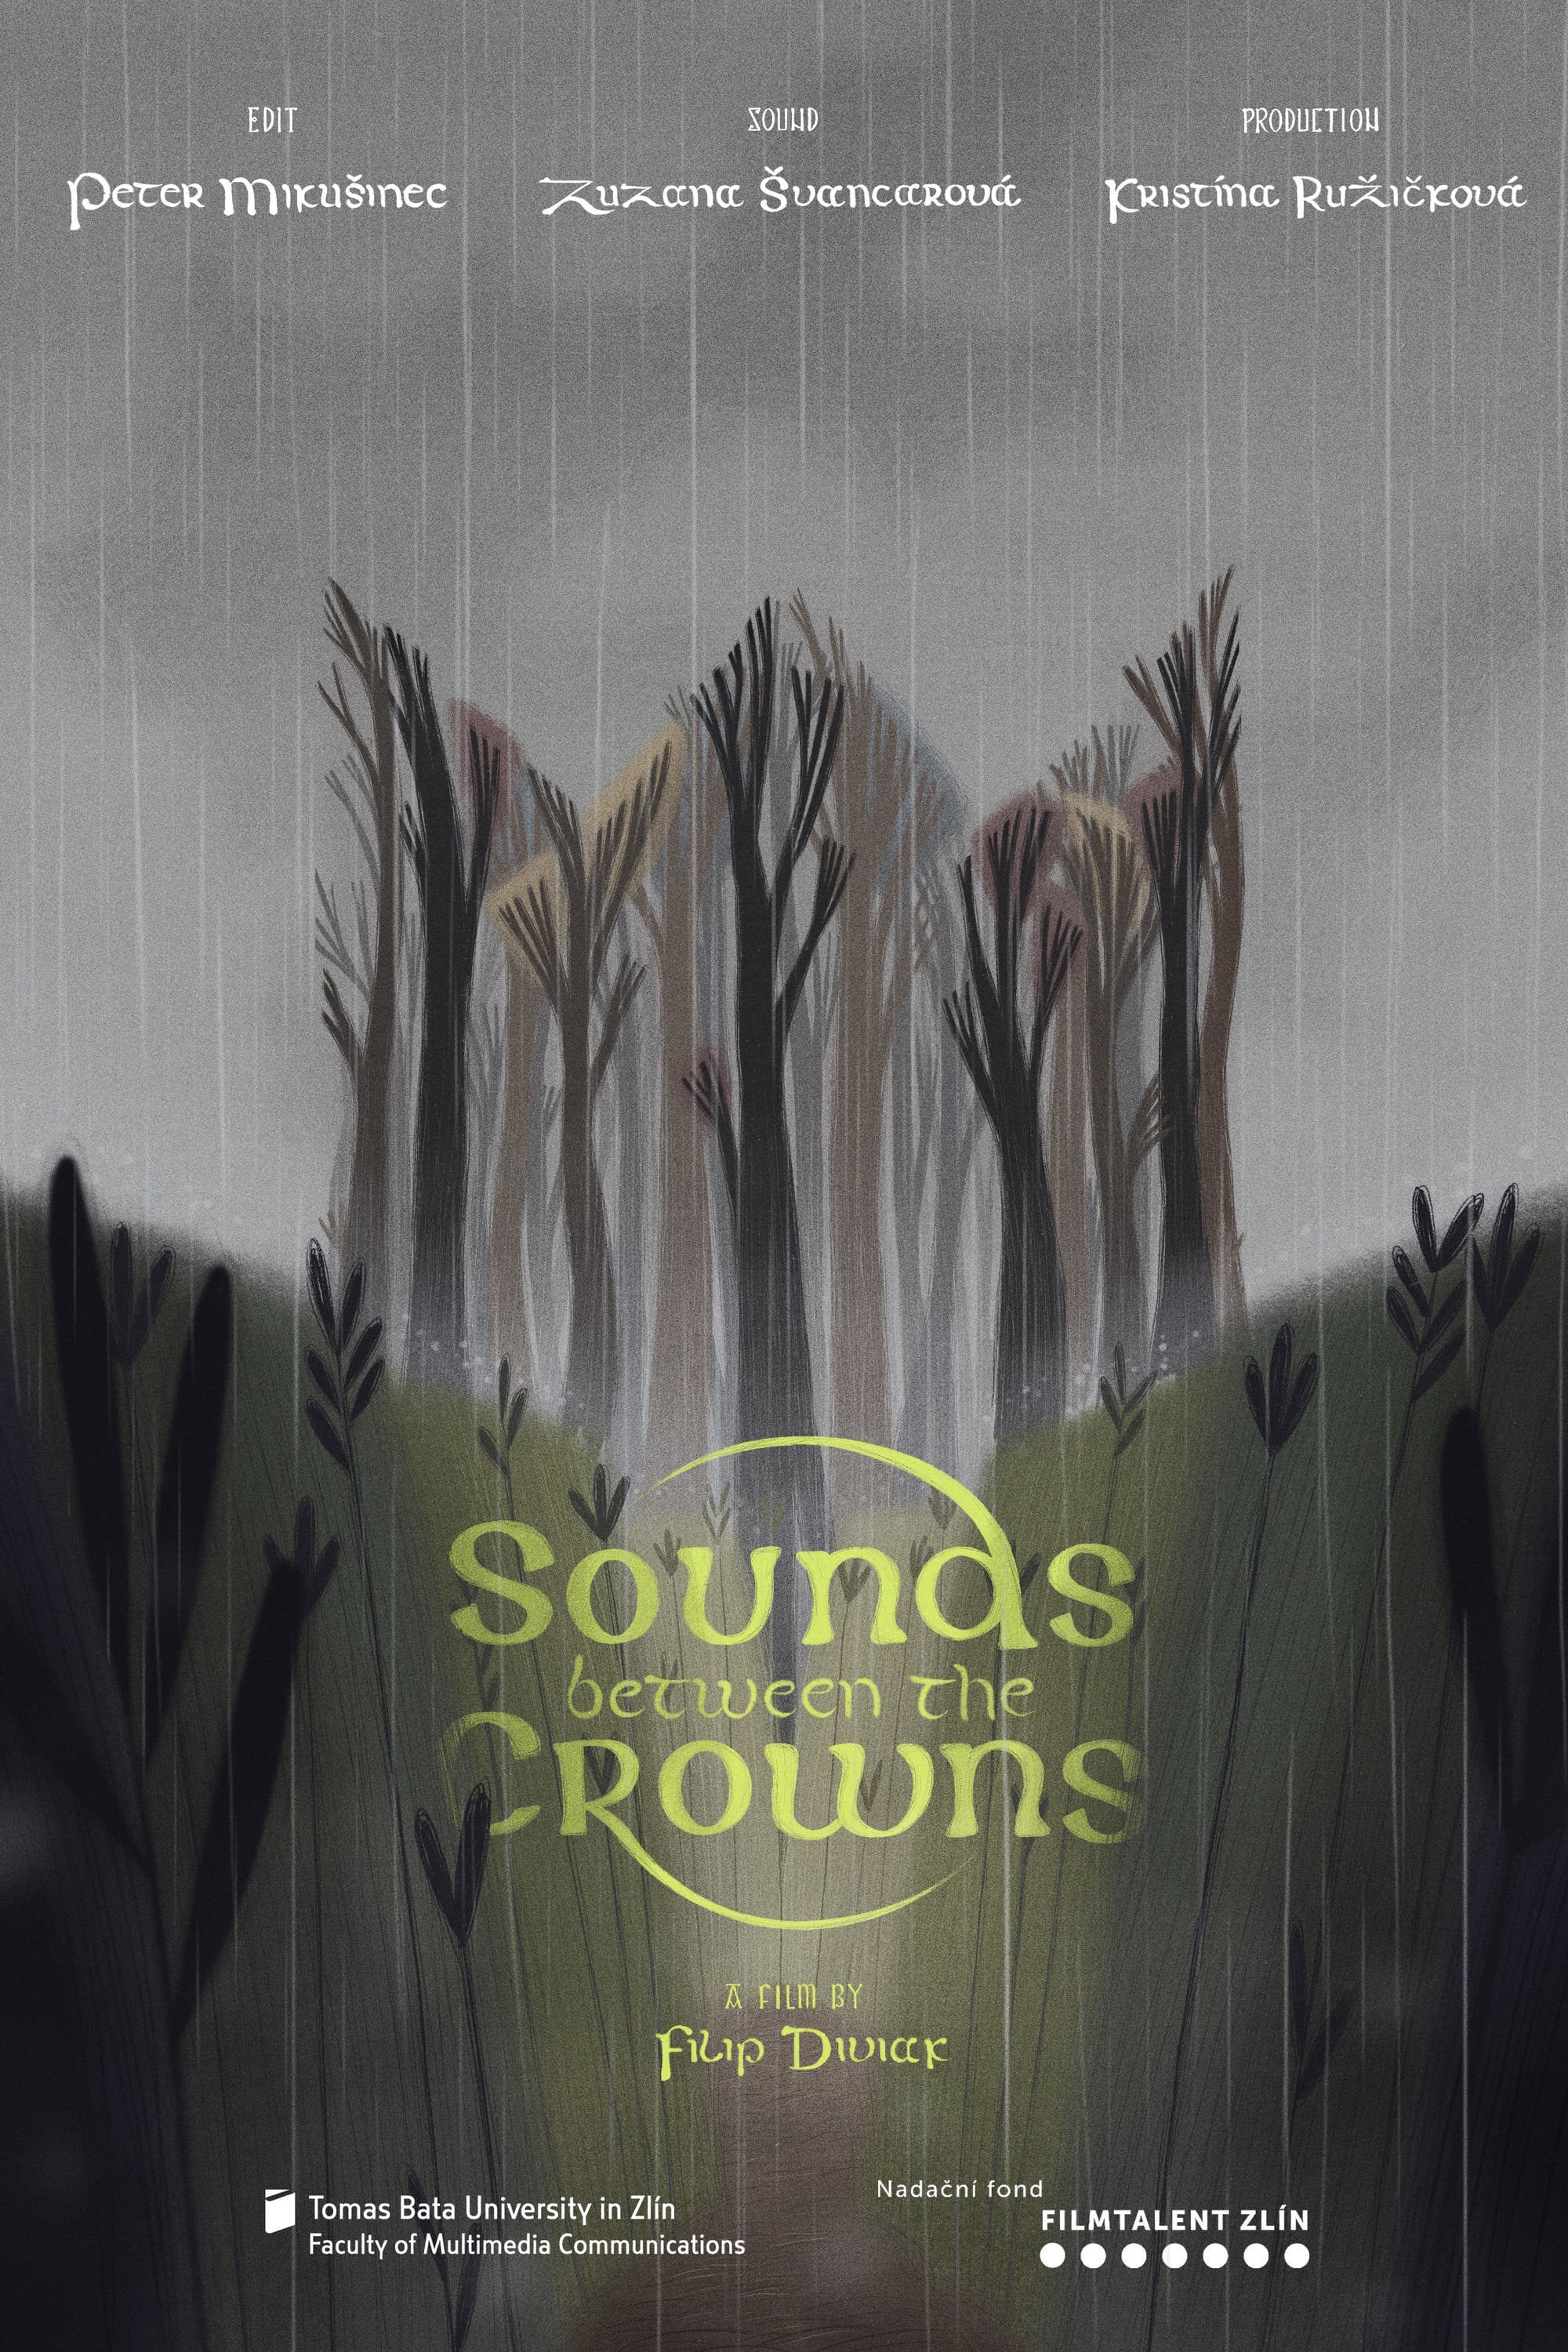 Sounds Between the Crowns